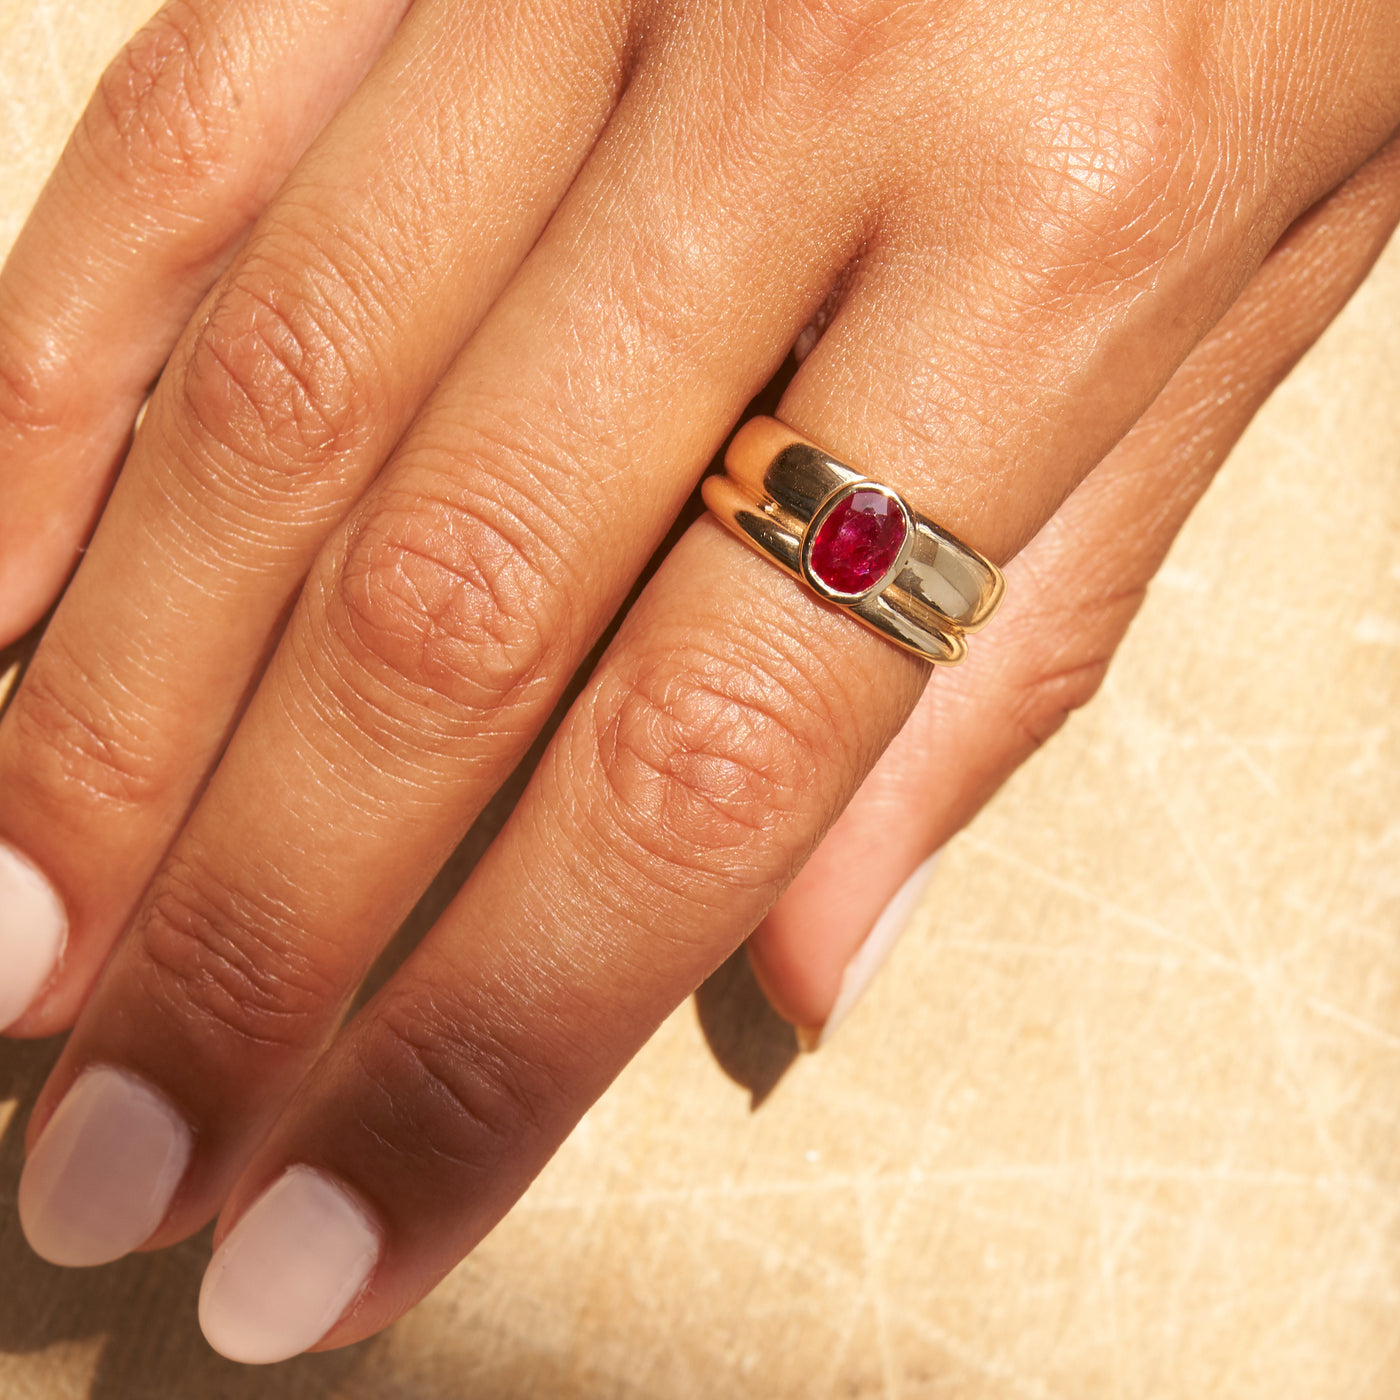 Model wearing yellow gold band ring with ruby center stone